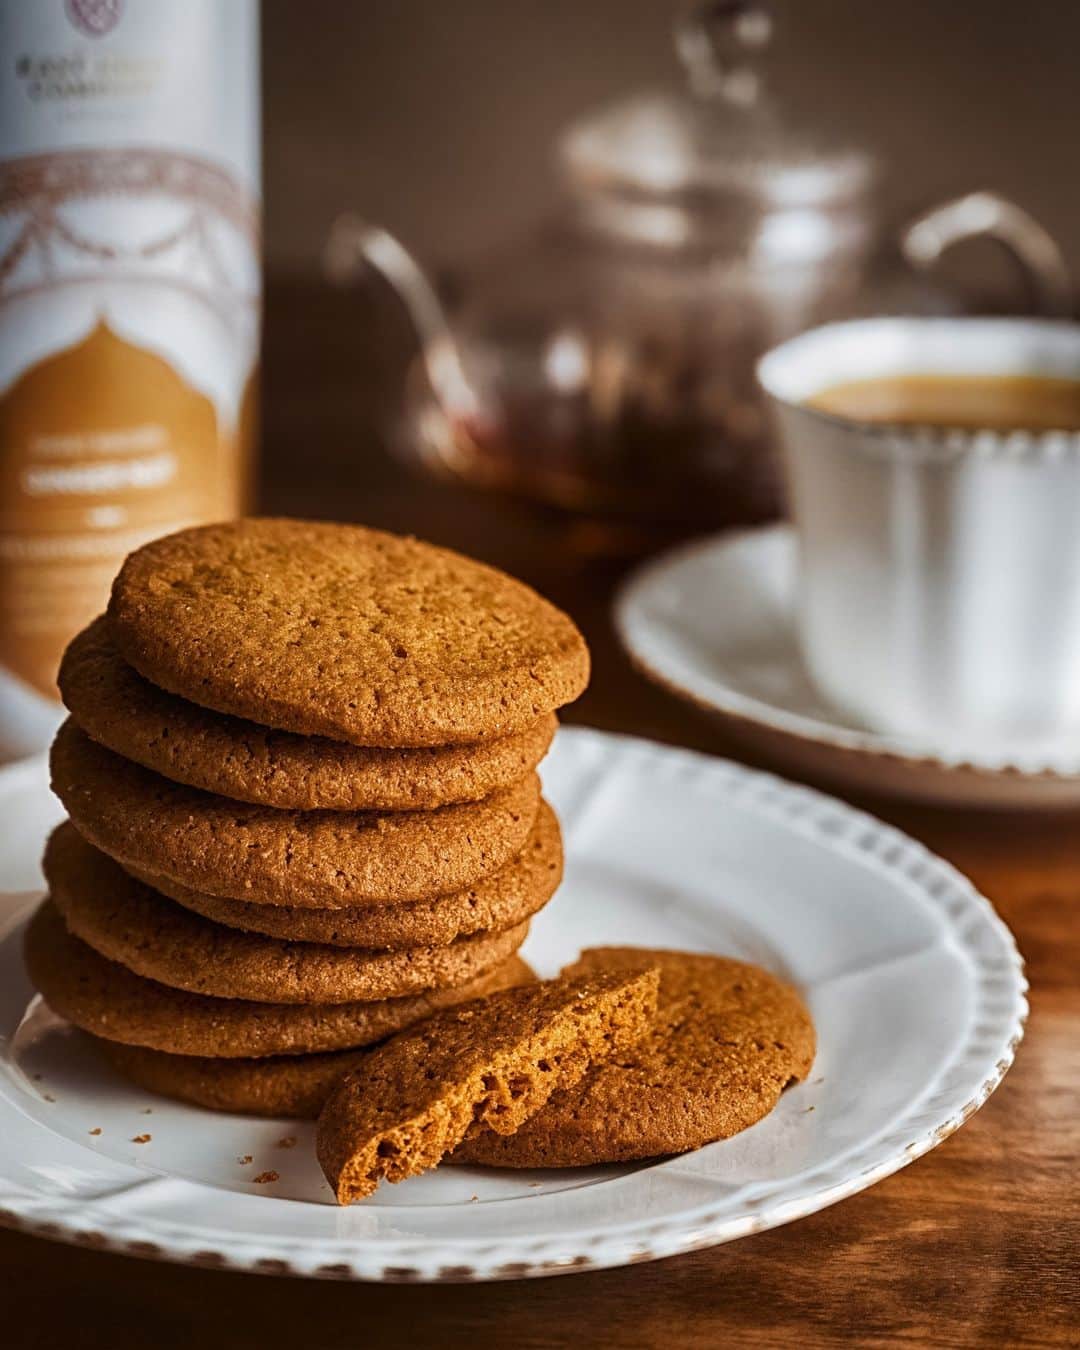 The East India Companyのインスタグラム：「The best and most delicious dunking biscuit? 🍪 We certainly think so. Made with ginger from the Far East, our Ginger Nut Biscuits are traditionally baked and warmingly bold. Ready set and...dunk.  #theeastindiacompany #luxury #luxuryfood #finefoods #gingerbiscuits #biscuits #ginger #gingerbread #gingercookies #coffee #tea」